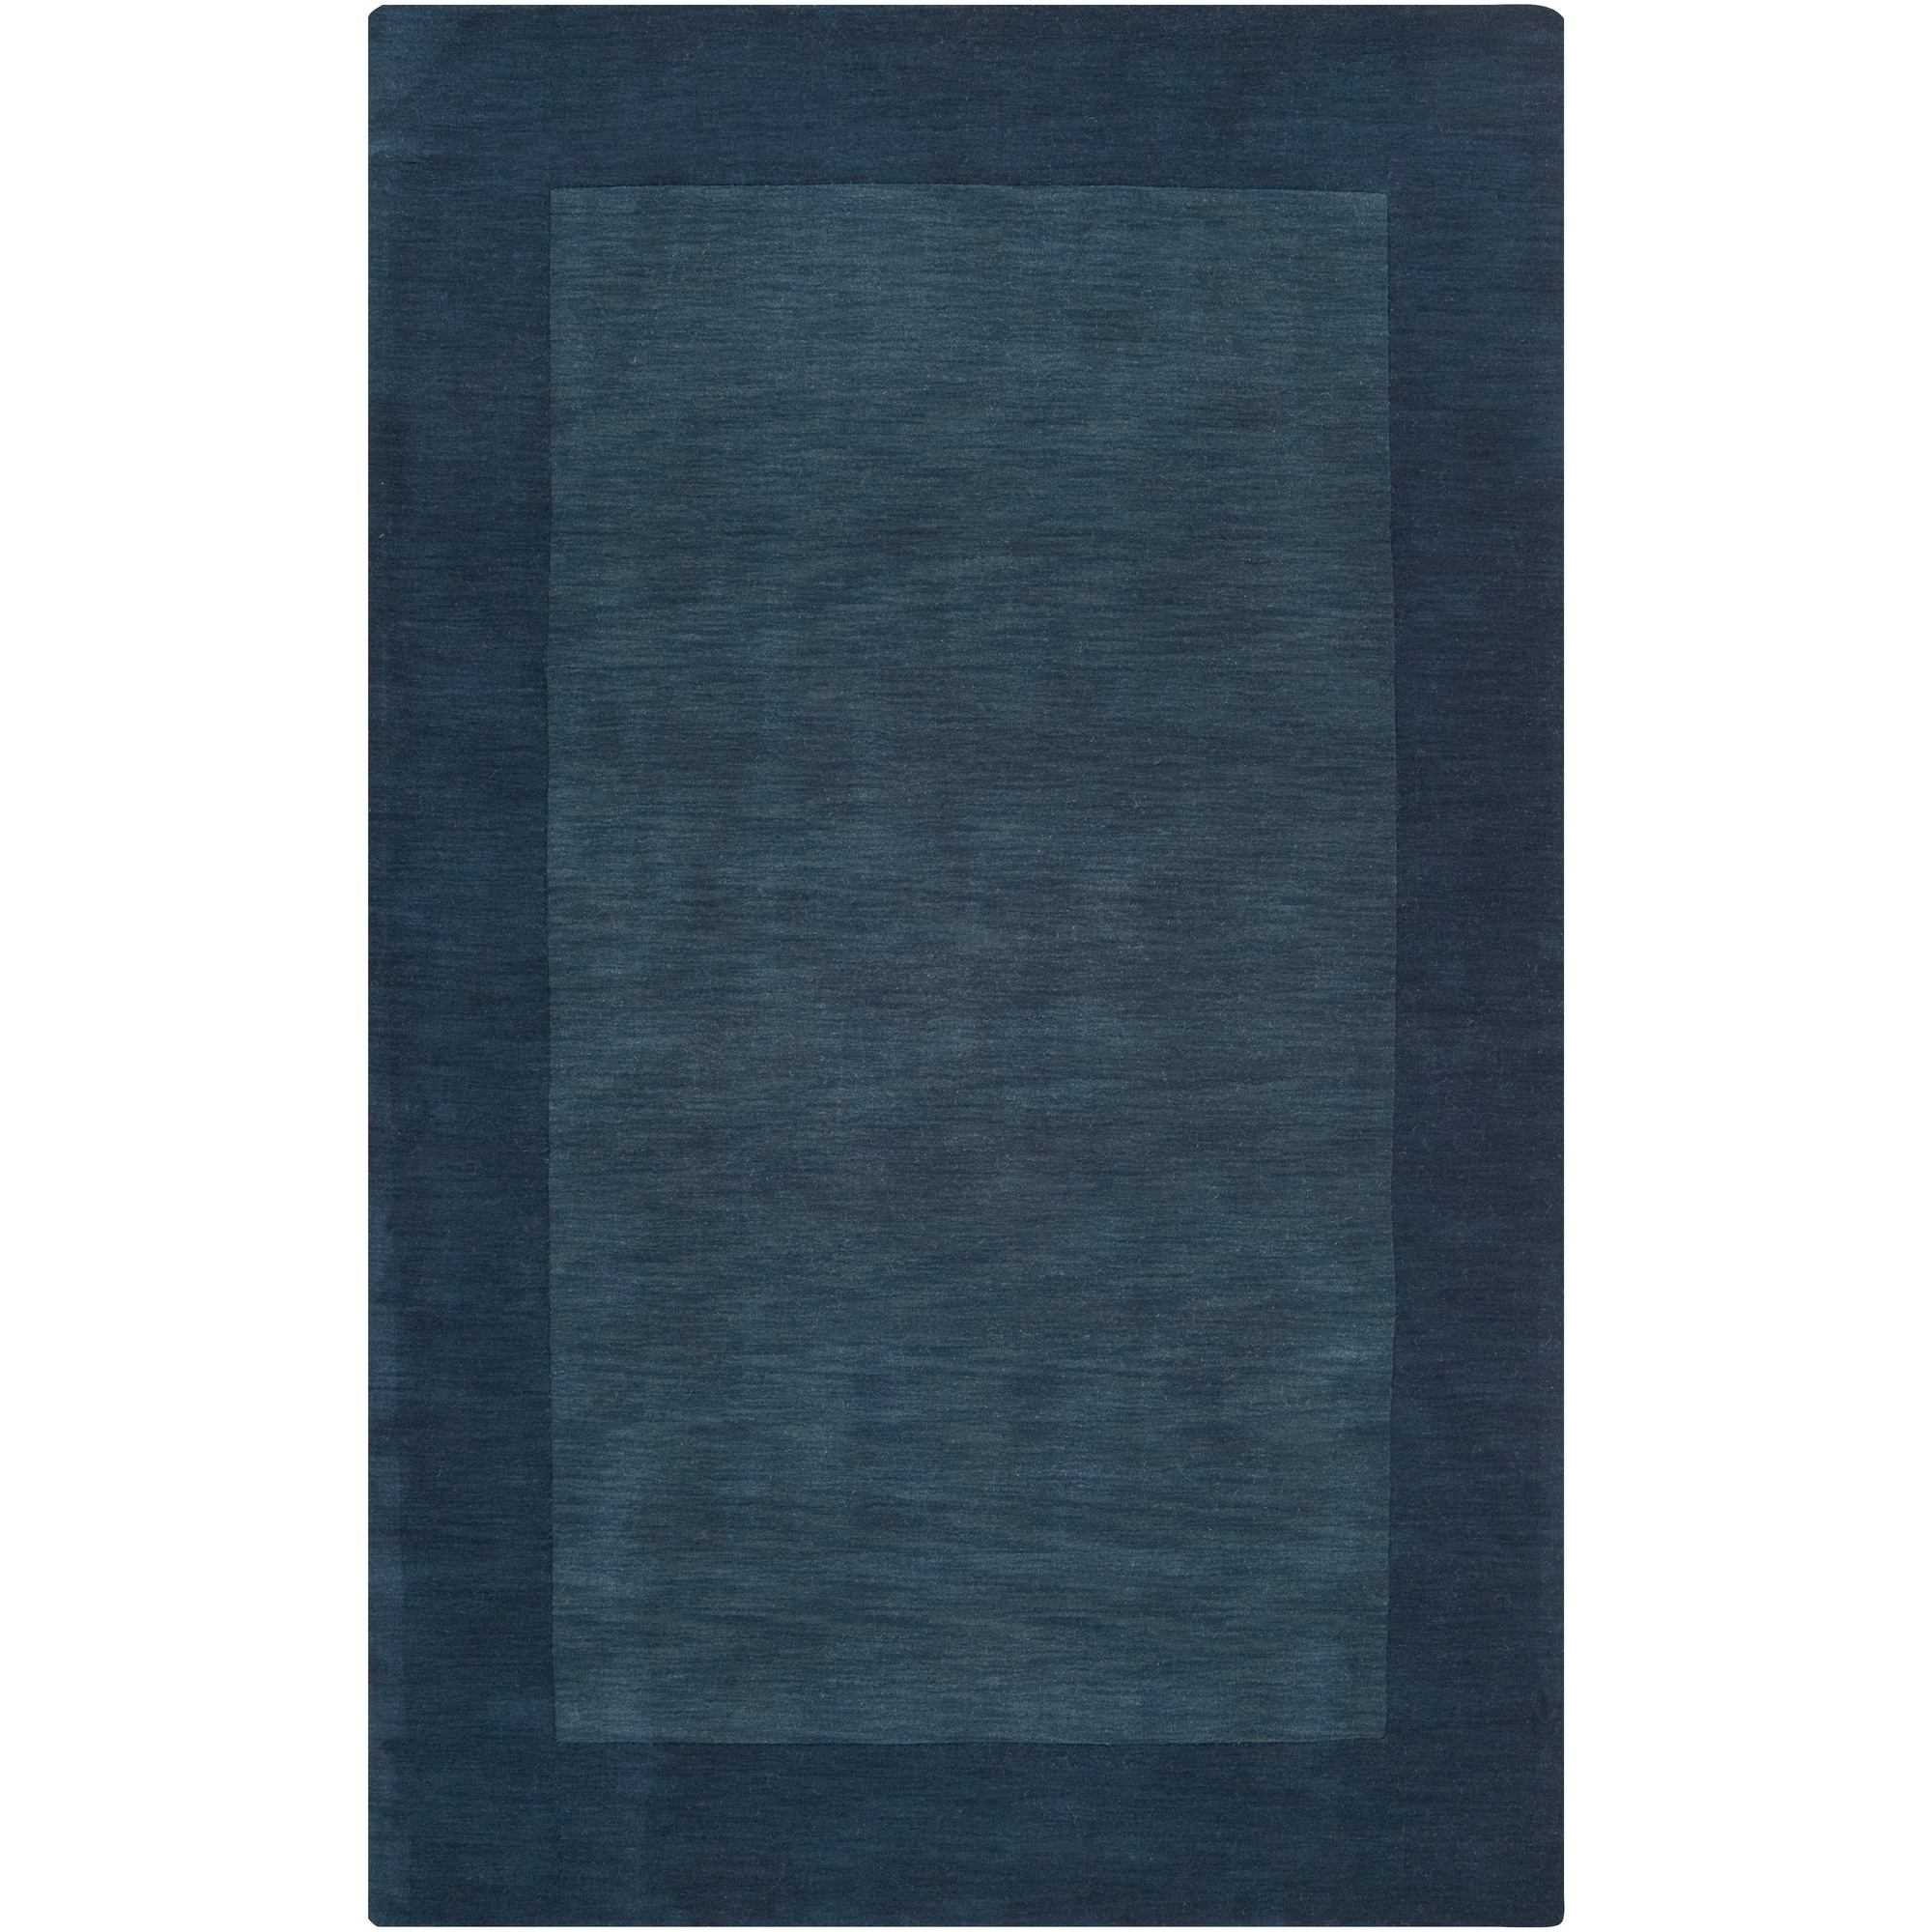 Hand crafted Navy Blue Tone on tone Bordered Wool Rug (8 X 11)